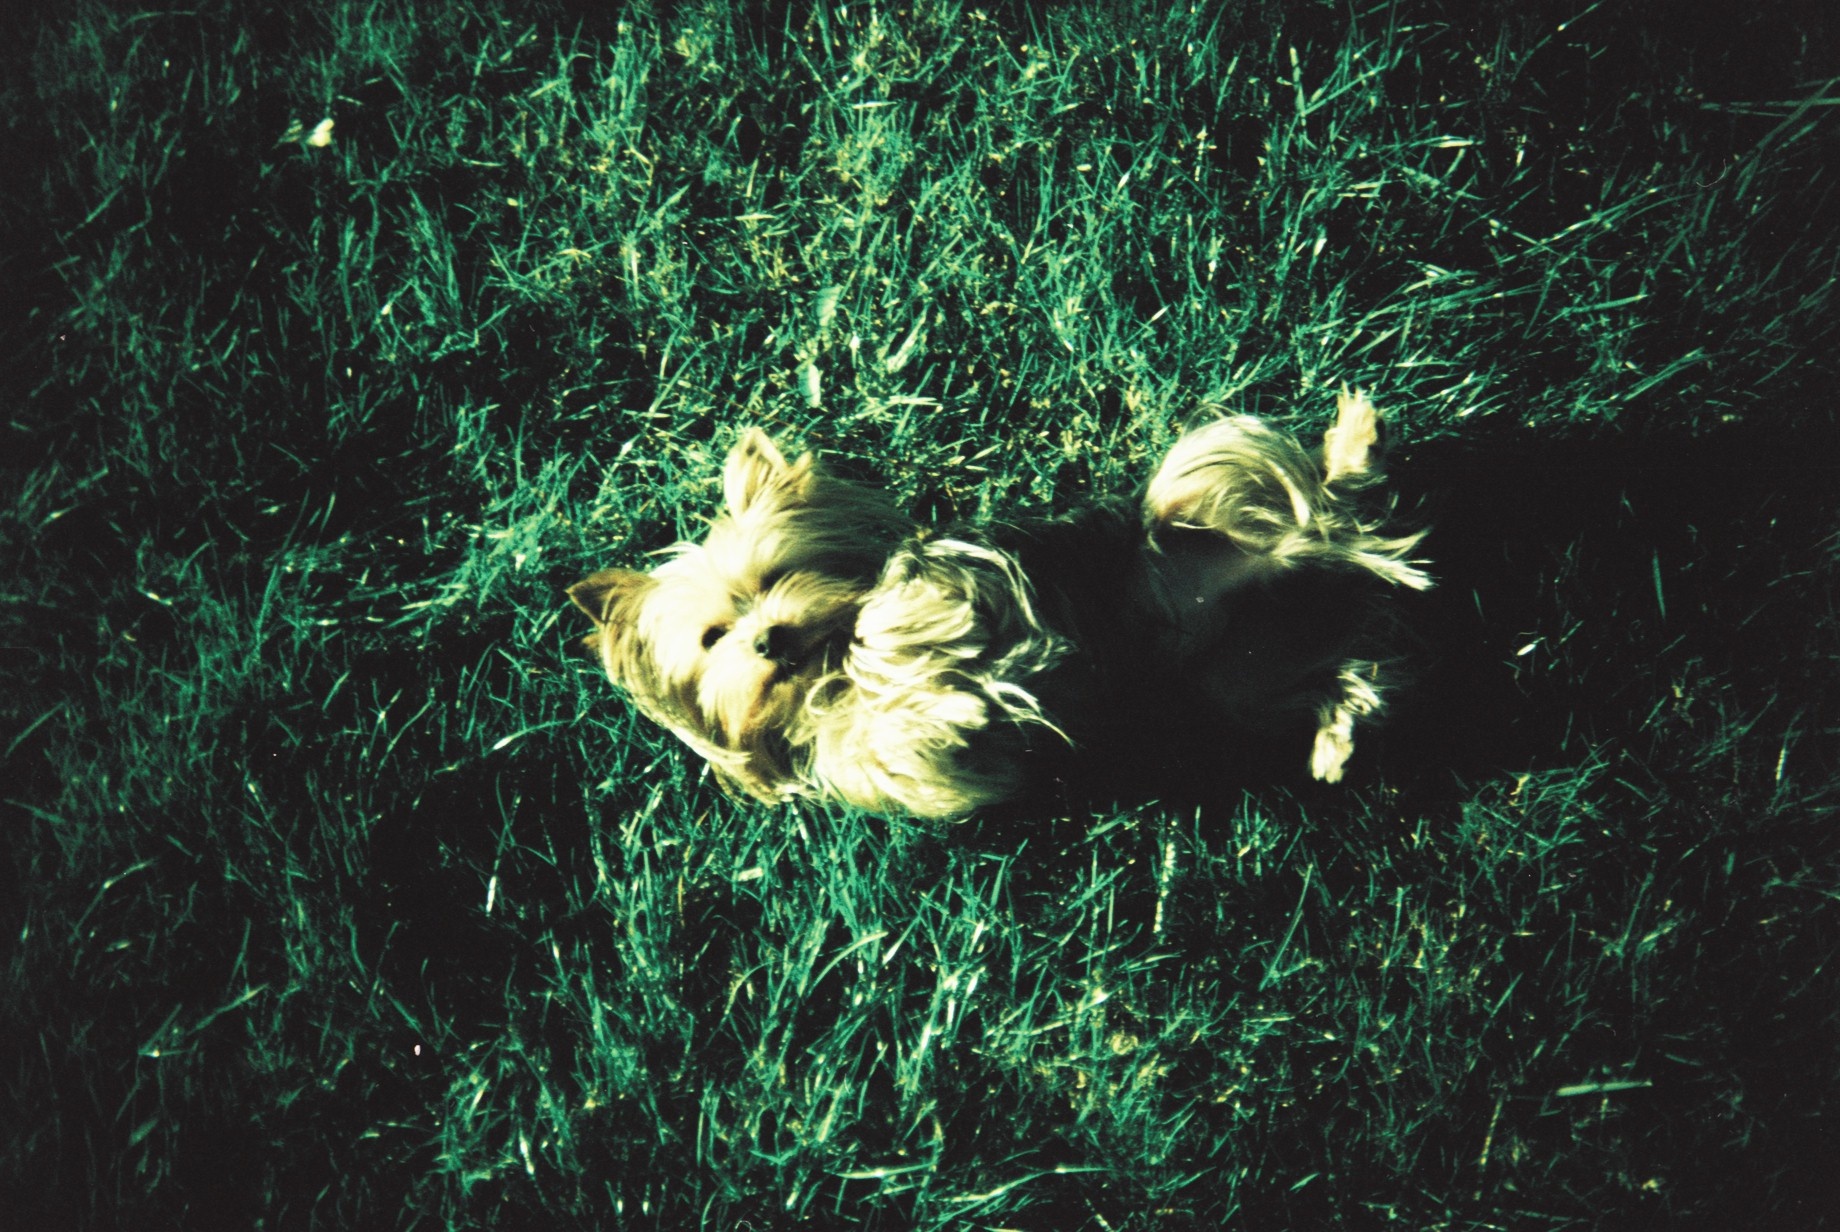 an image of a dog rolling around in the grass